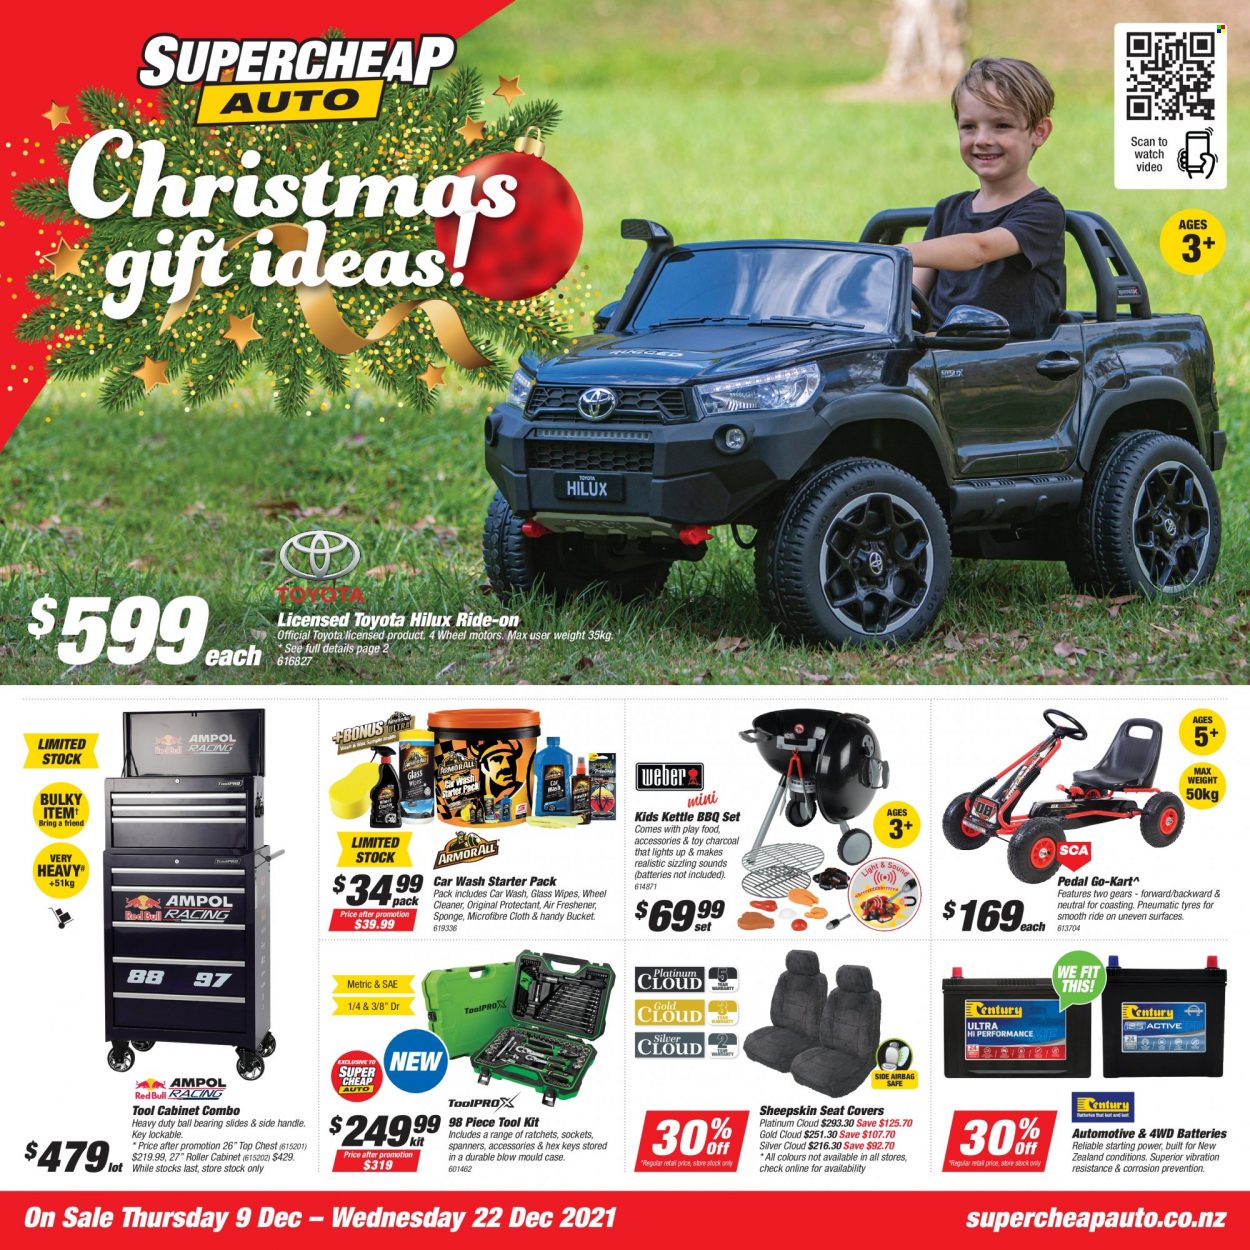 thumbnail - SuperCheap Auto mailer - 09.12.2021 - 22.12.2021 - Sales products - wipes, cleaner, sponge, tool set, cabinet, tool cabinets, charcoal, go-kart, car seat cover, car battery, automotive batteries, air freshener, tires. Page 1.